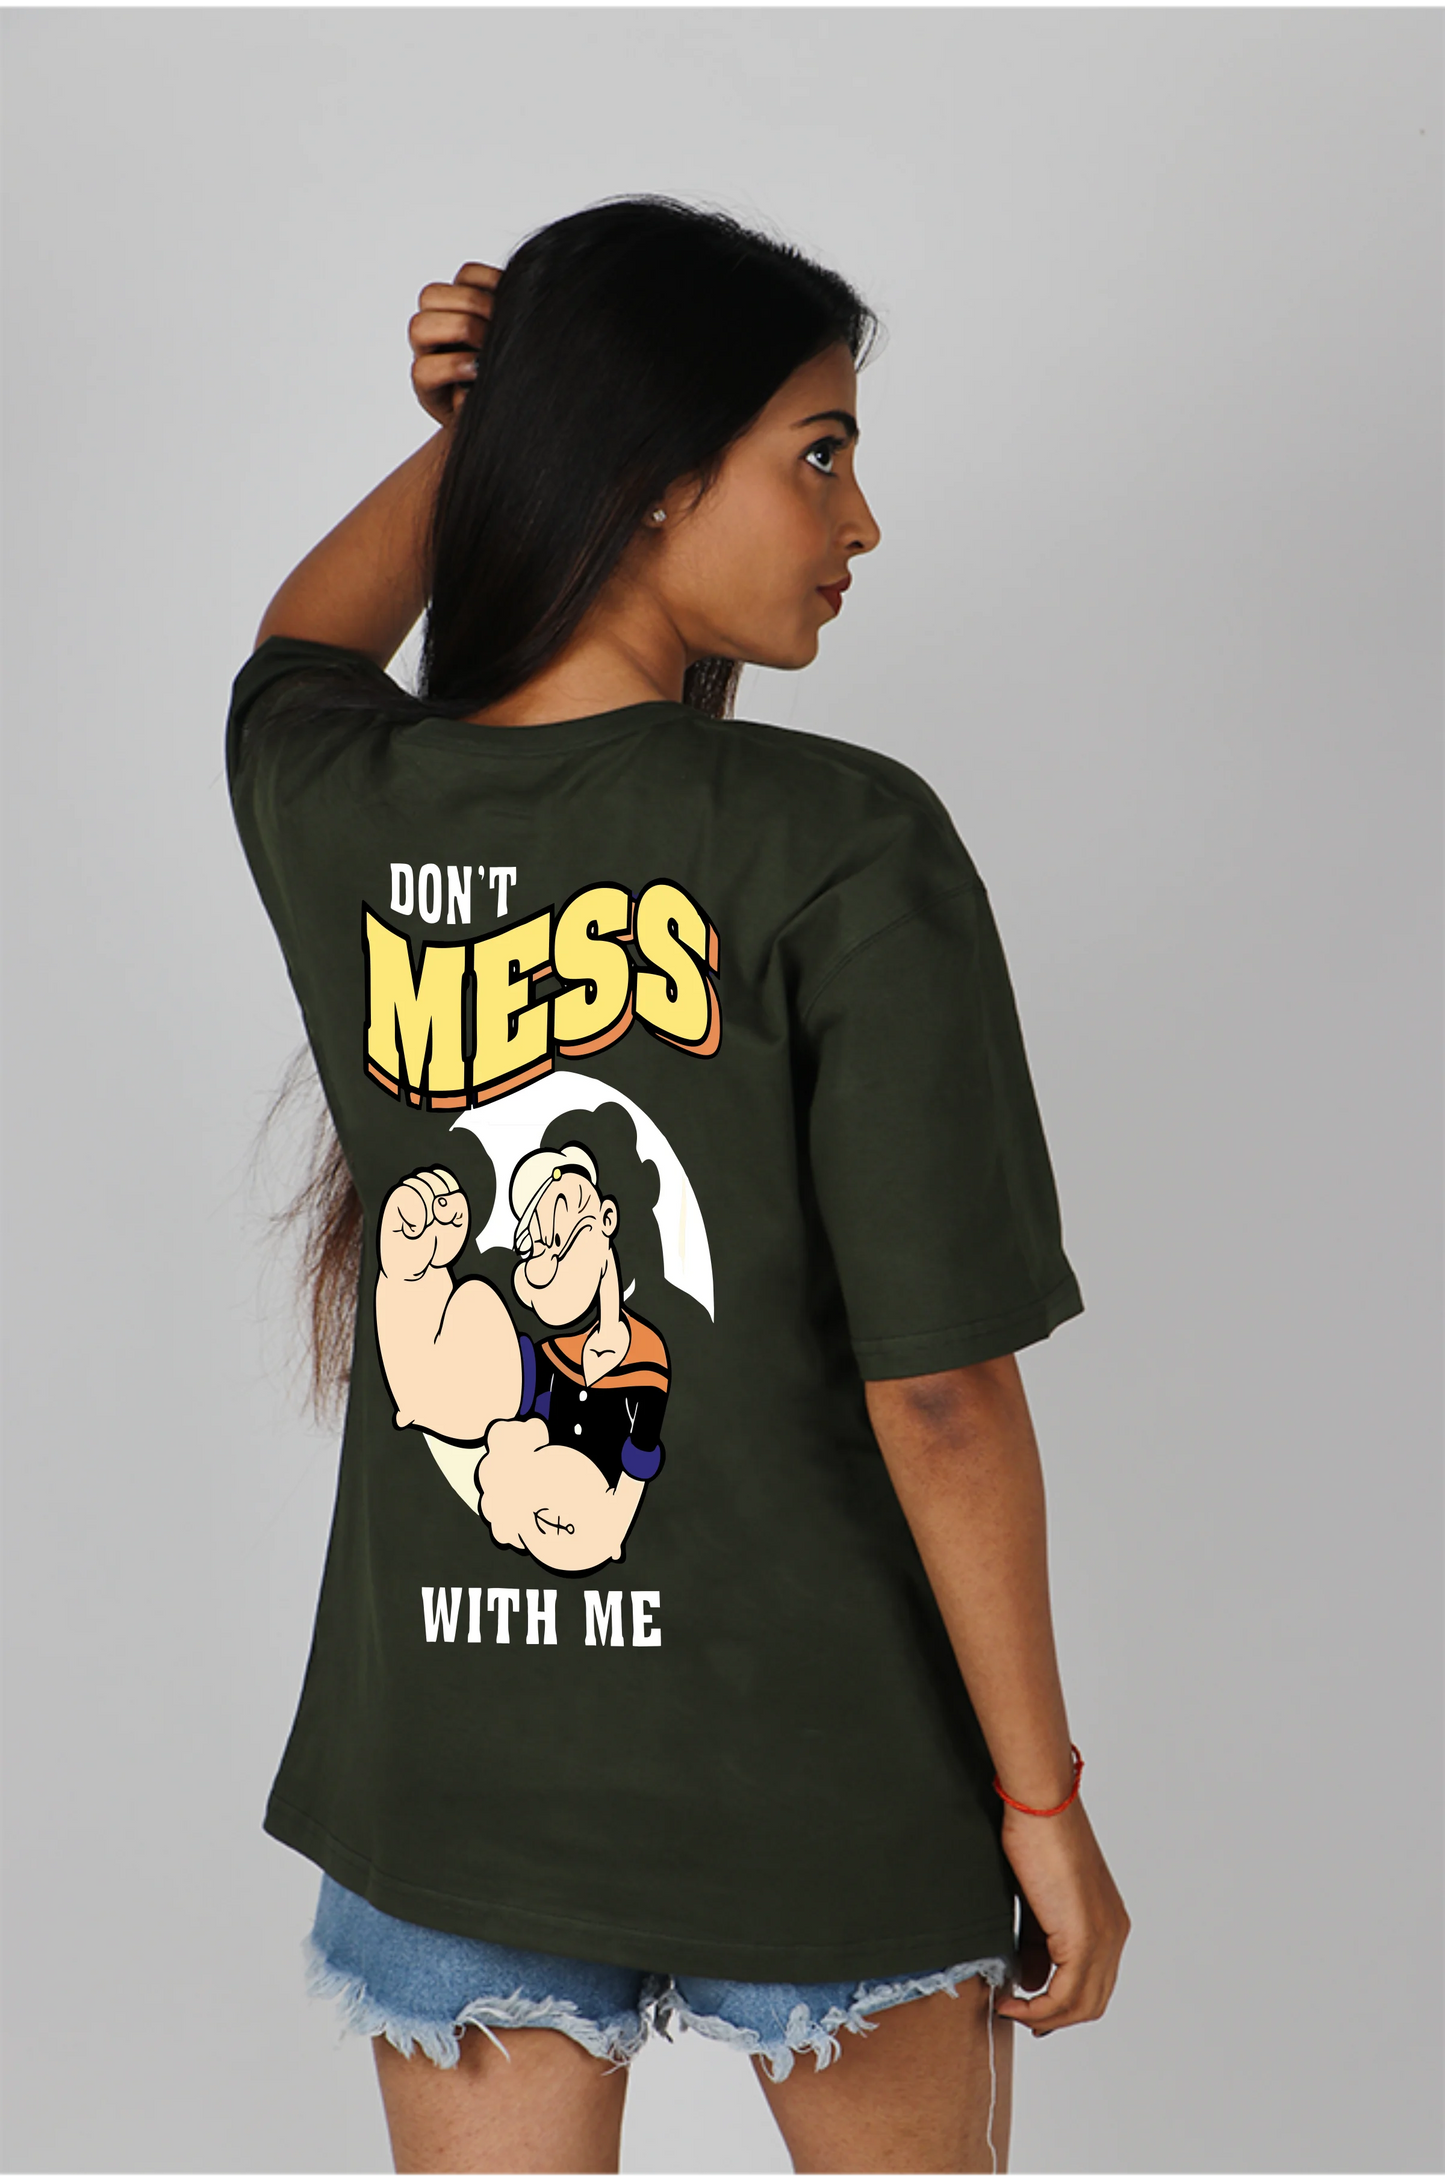  Channel your inner Popeye with these empowering T-shirts crafted for the modern woman.